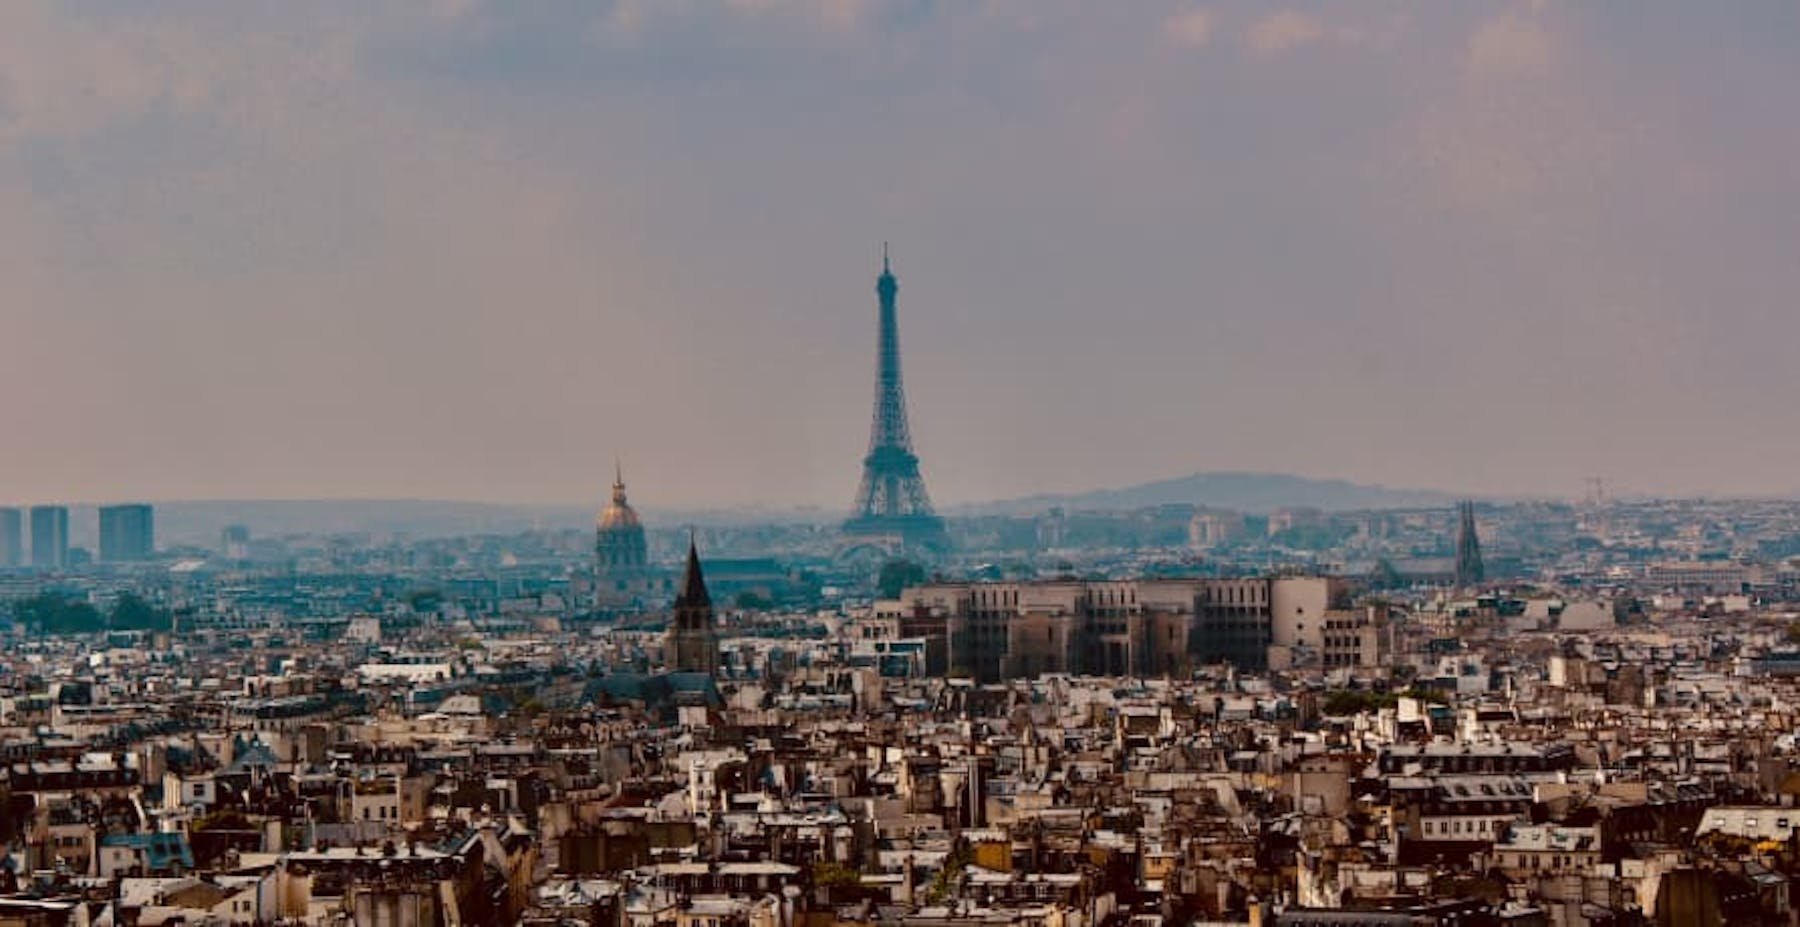 View of Paris with the Eiffel Tower